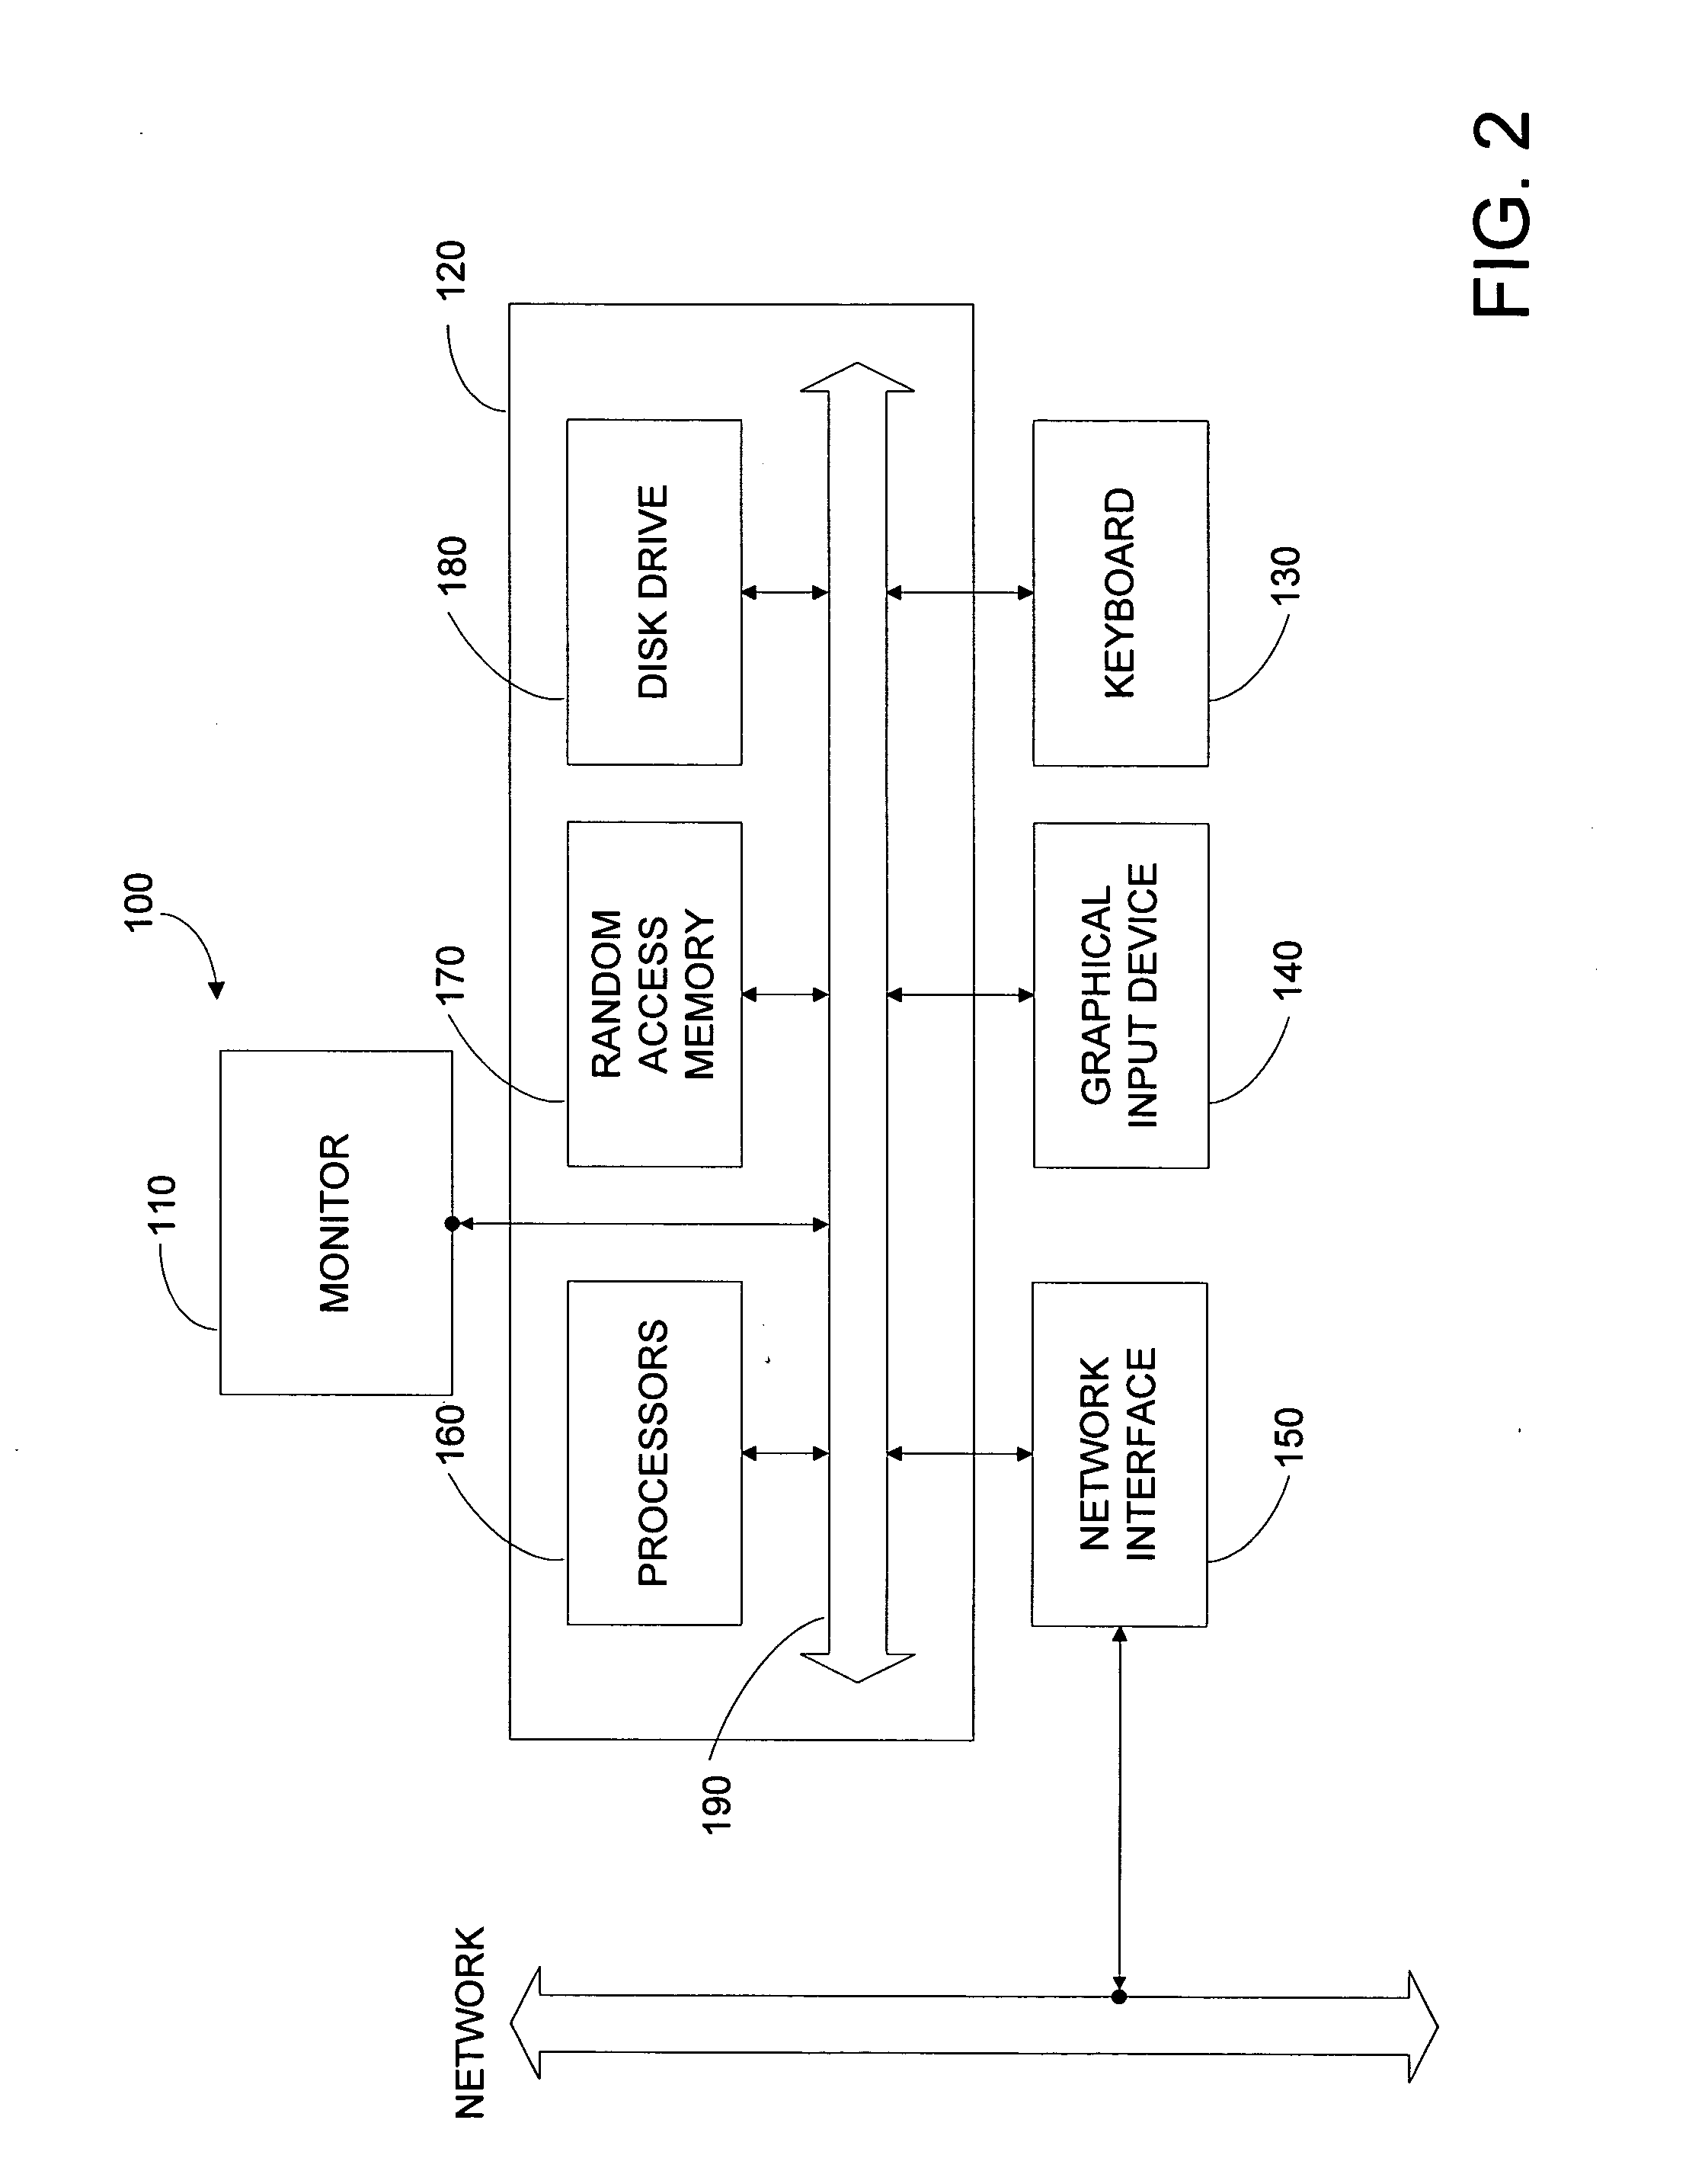 Method and apparatus for supporting service enablers via service request handholding